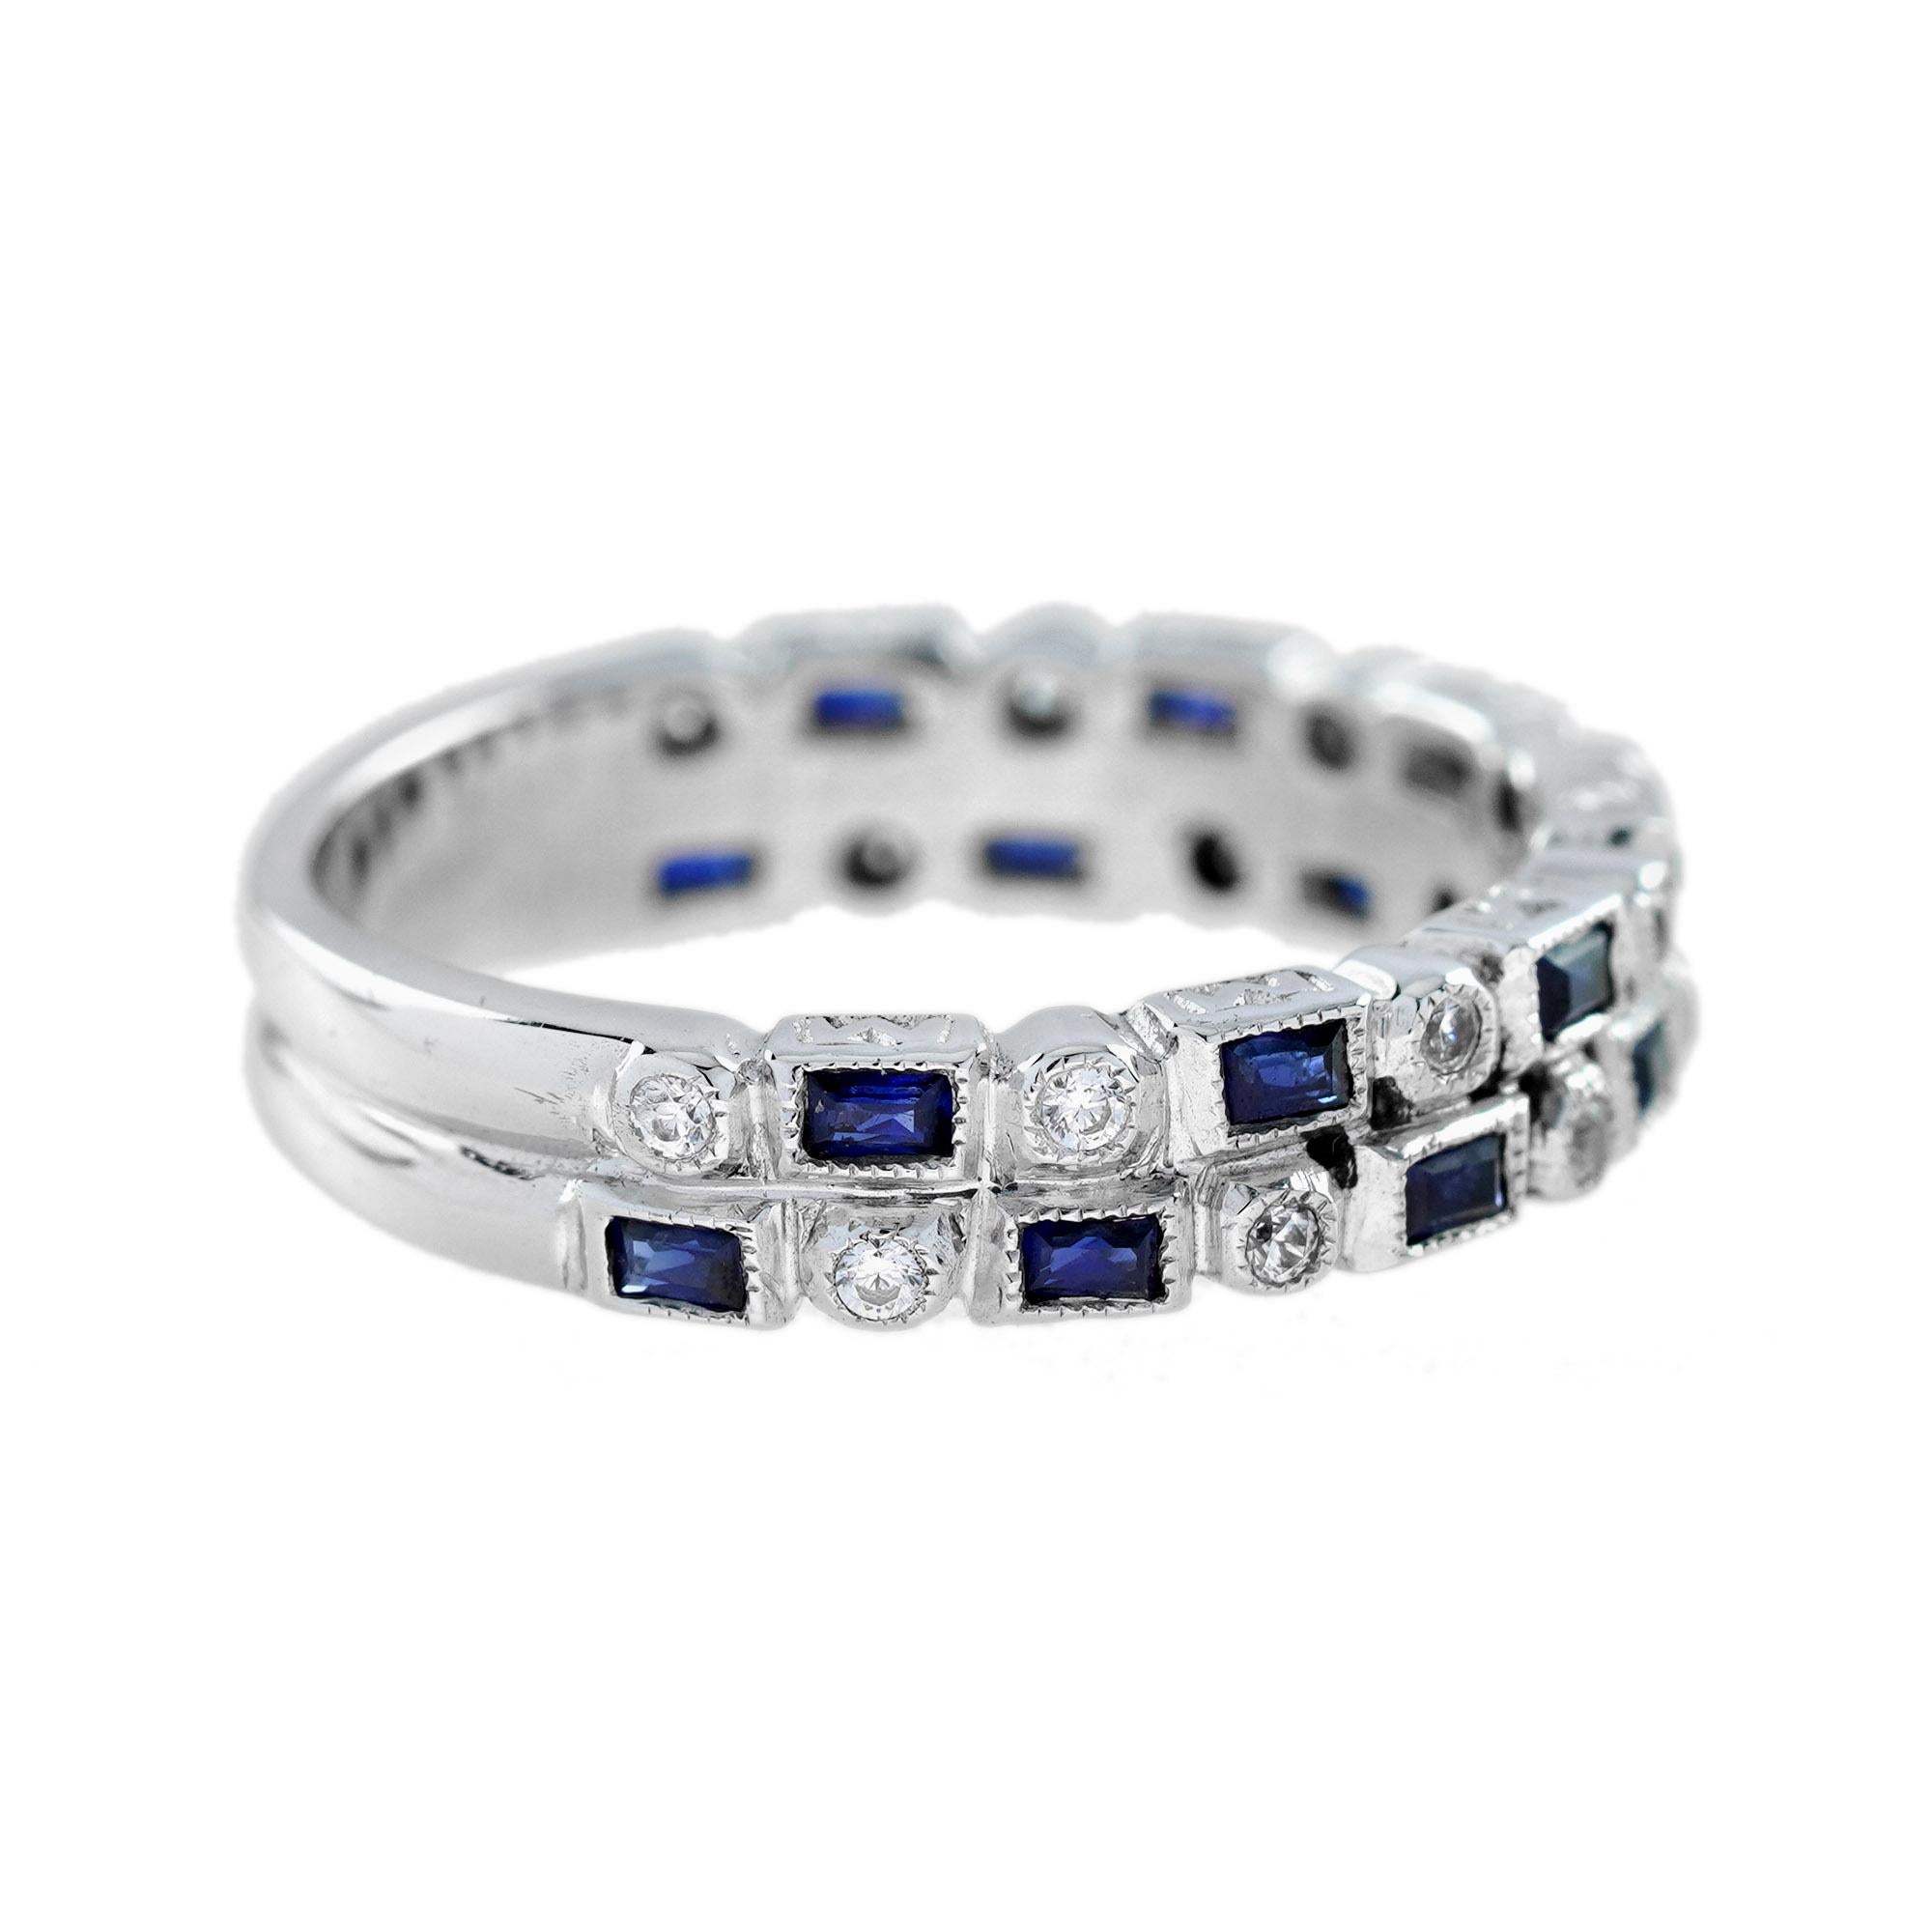 For Sale:  Diamond and Blue Sapphire Art Deco Style Half Eternity Ring in 14K White Gold 4